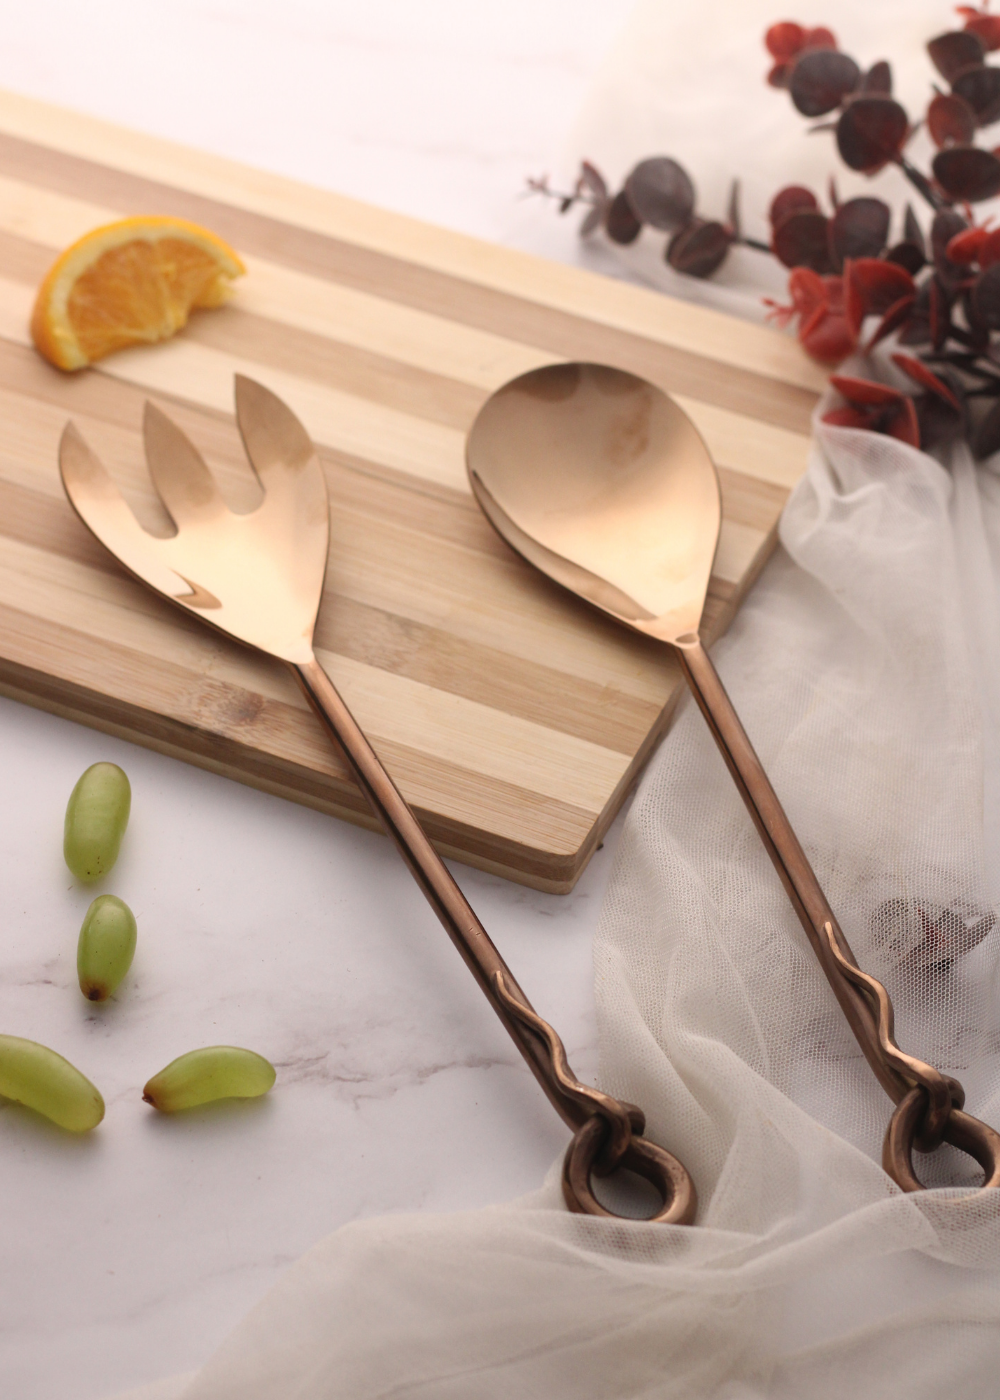 Bronze salad cutlery set on wooden surface